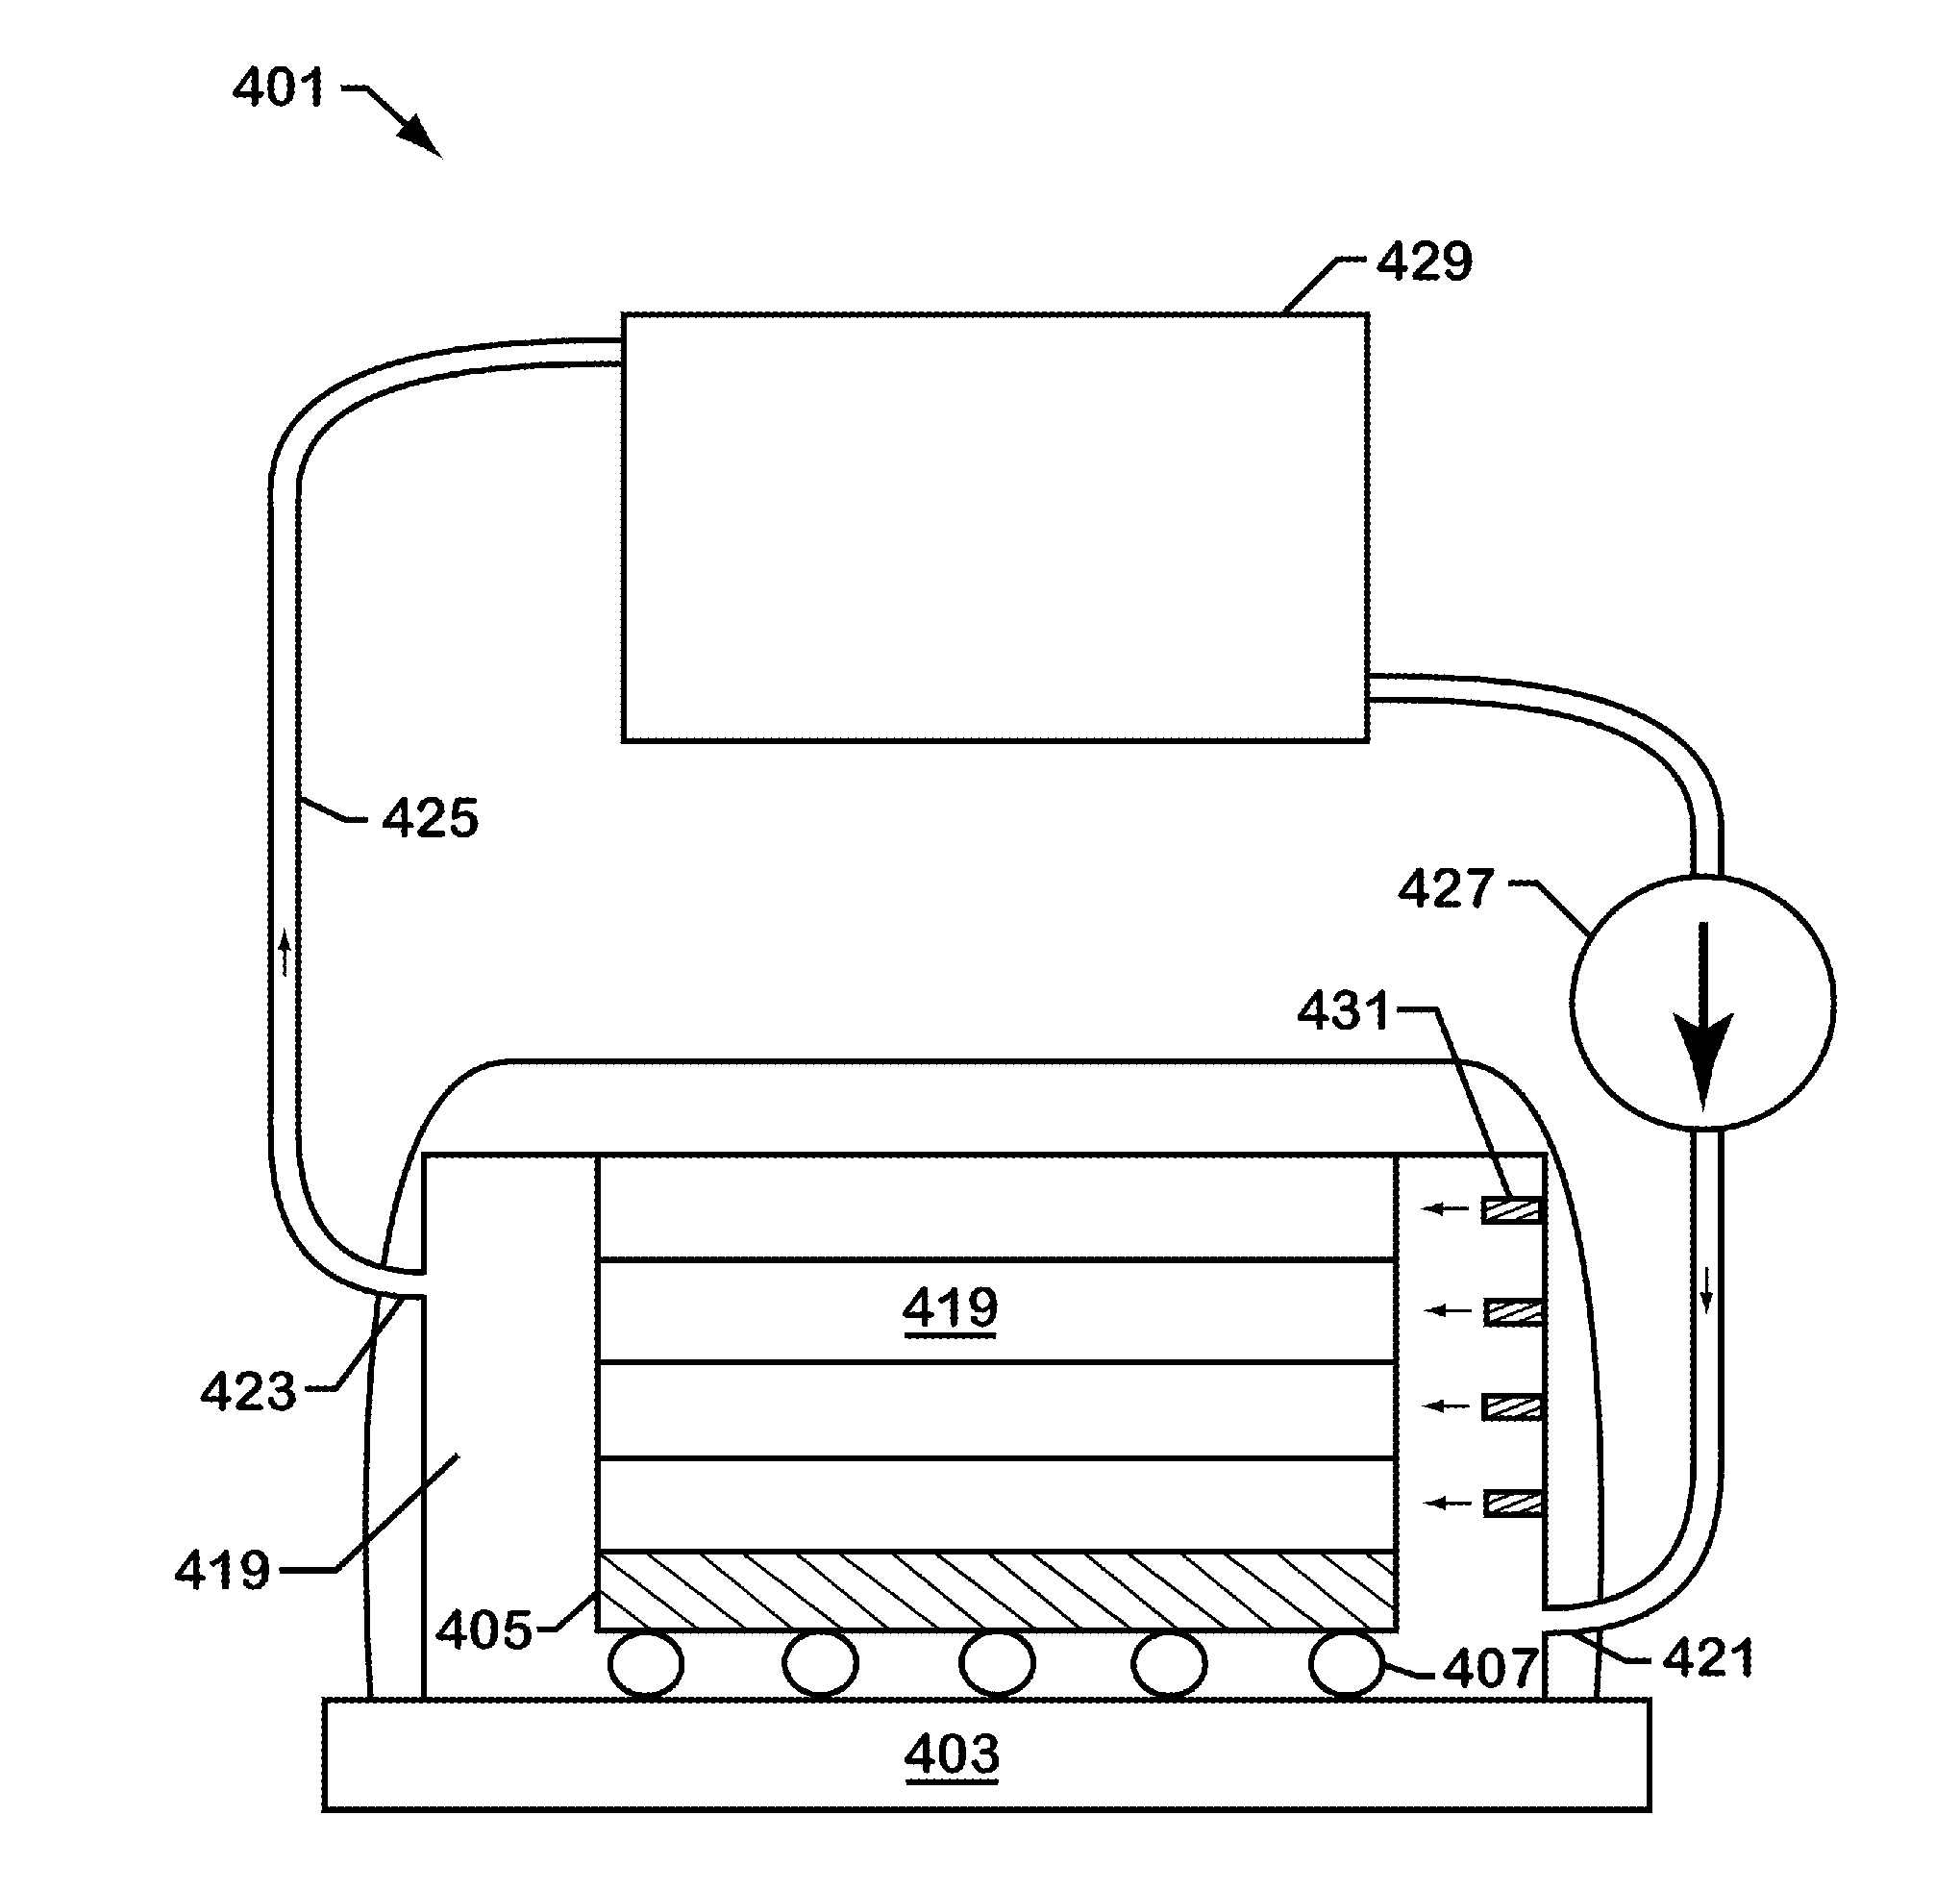 Synthetic Jet Ejector for Augmentation of Pumped Liquid Loop Cooling and Enhancement of Pool and Flow Boiling